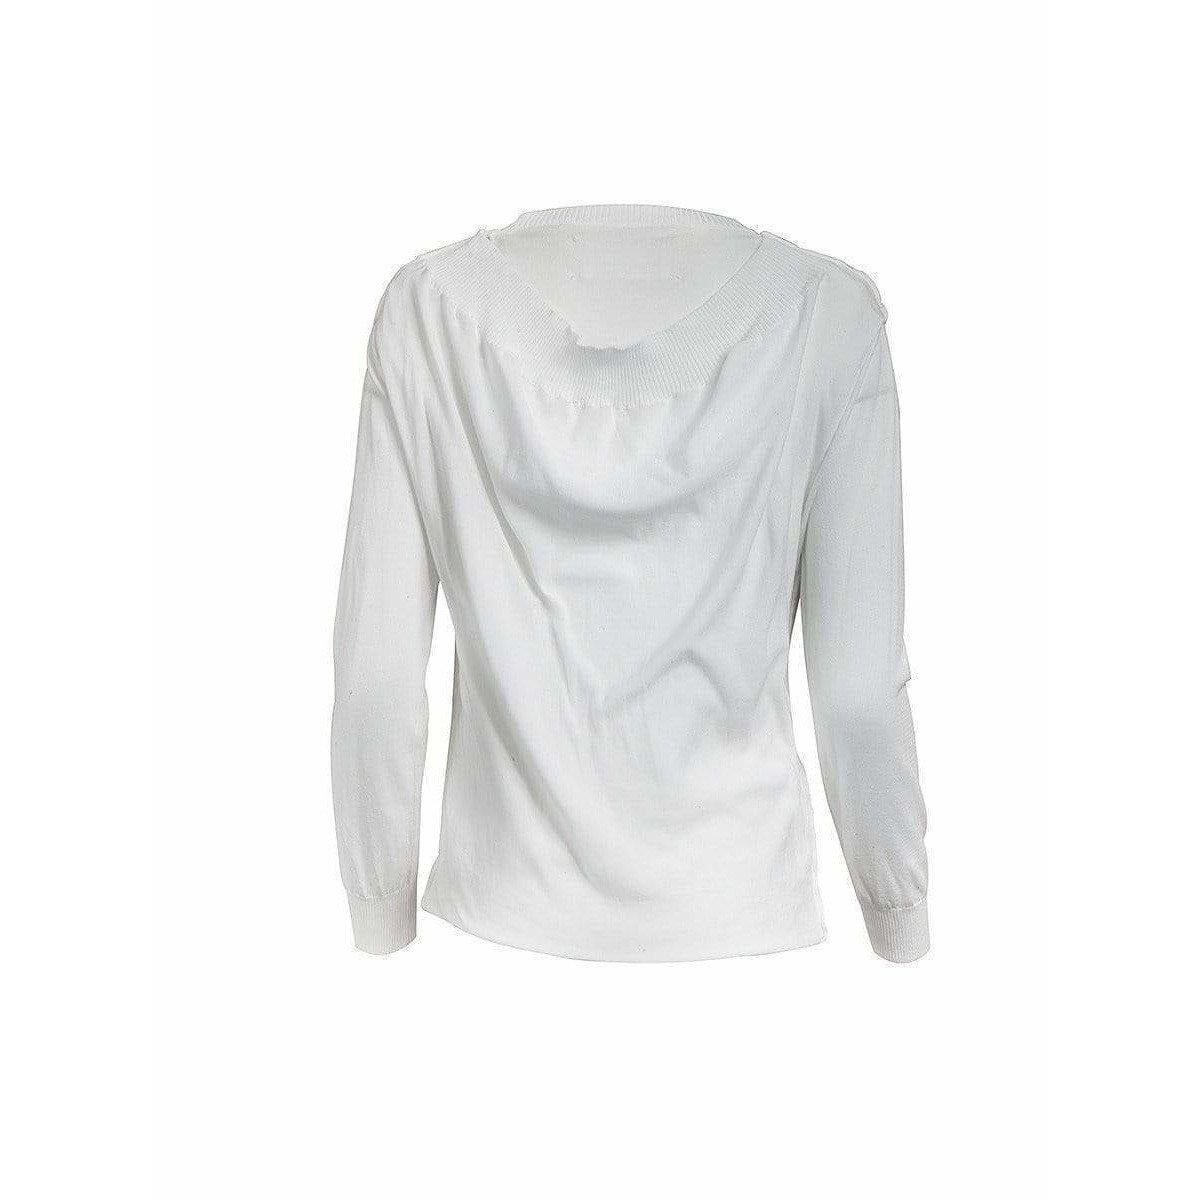 White cotton knit sweater, with a ribbed V-neck beneath a wide ribbed scoop neck that extends to the back and becomes a hoodie. This delight comes from the Maison Martin Margiela Iconic Artisanal Collection.